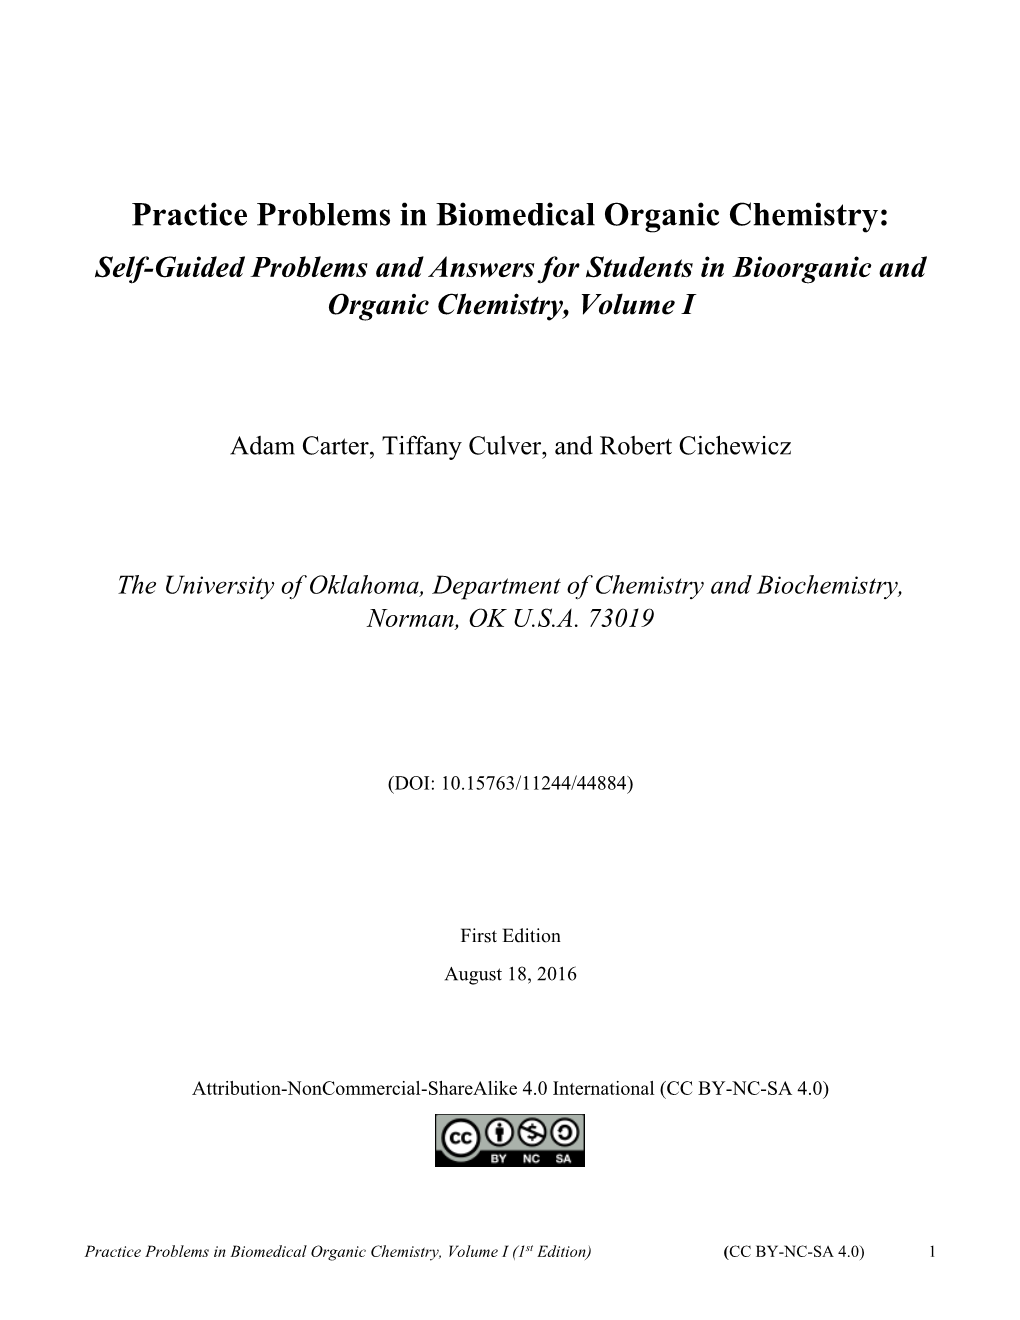 Practice Problems in Biomedical Organic Chemistry: Self-Guided Problems and Answers for Students in Bioorganic and Organic Chemistry, Volume I